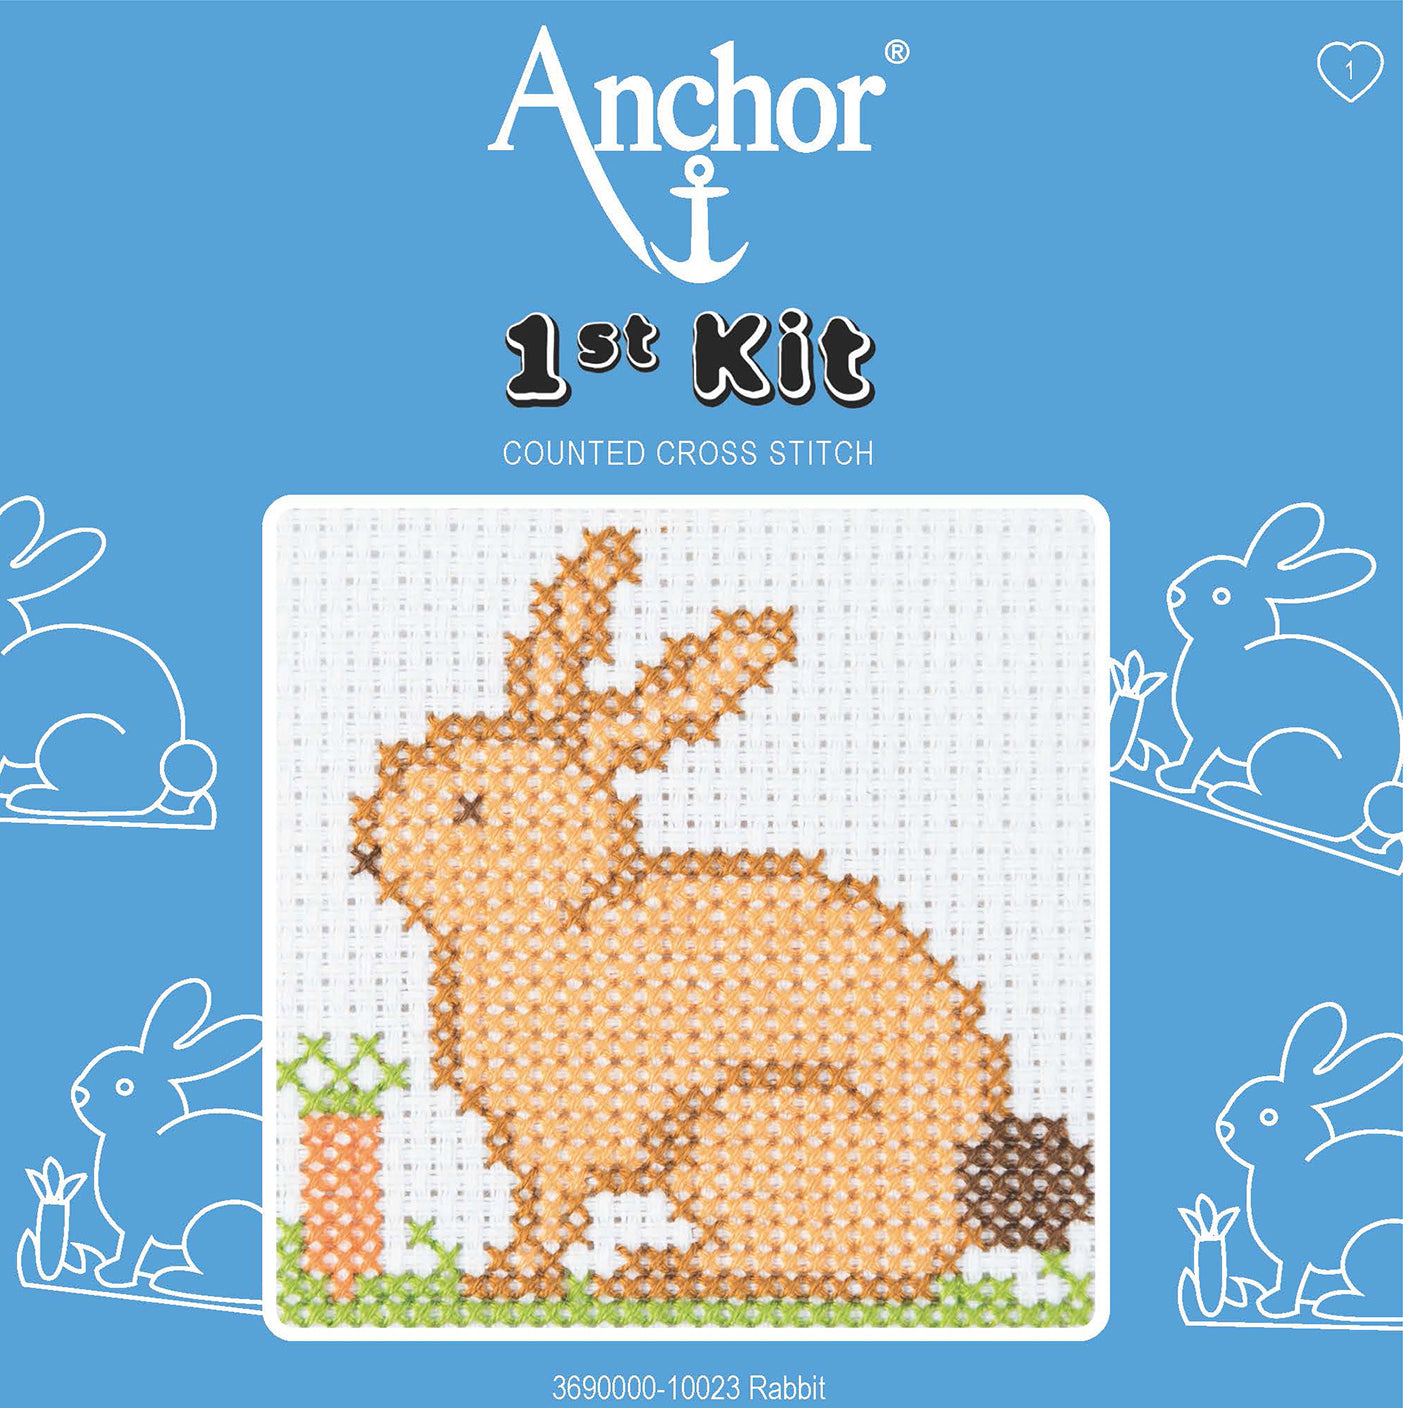 Anchor 1st Counted Cross Stitch Kit Rabbit